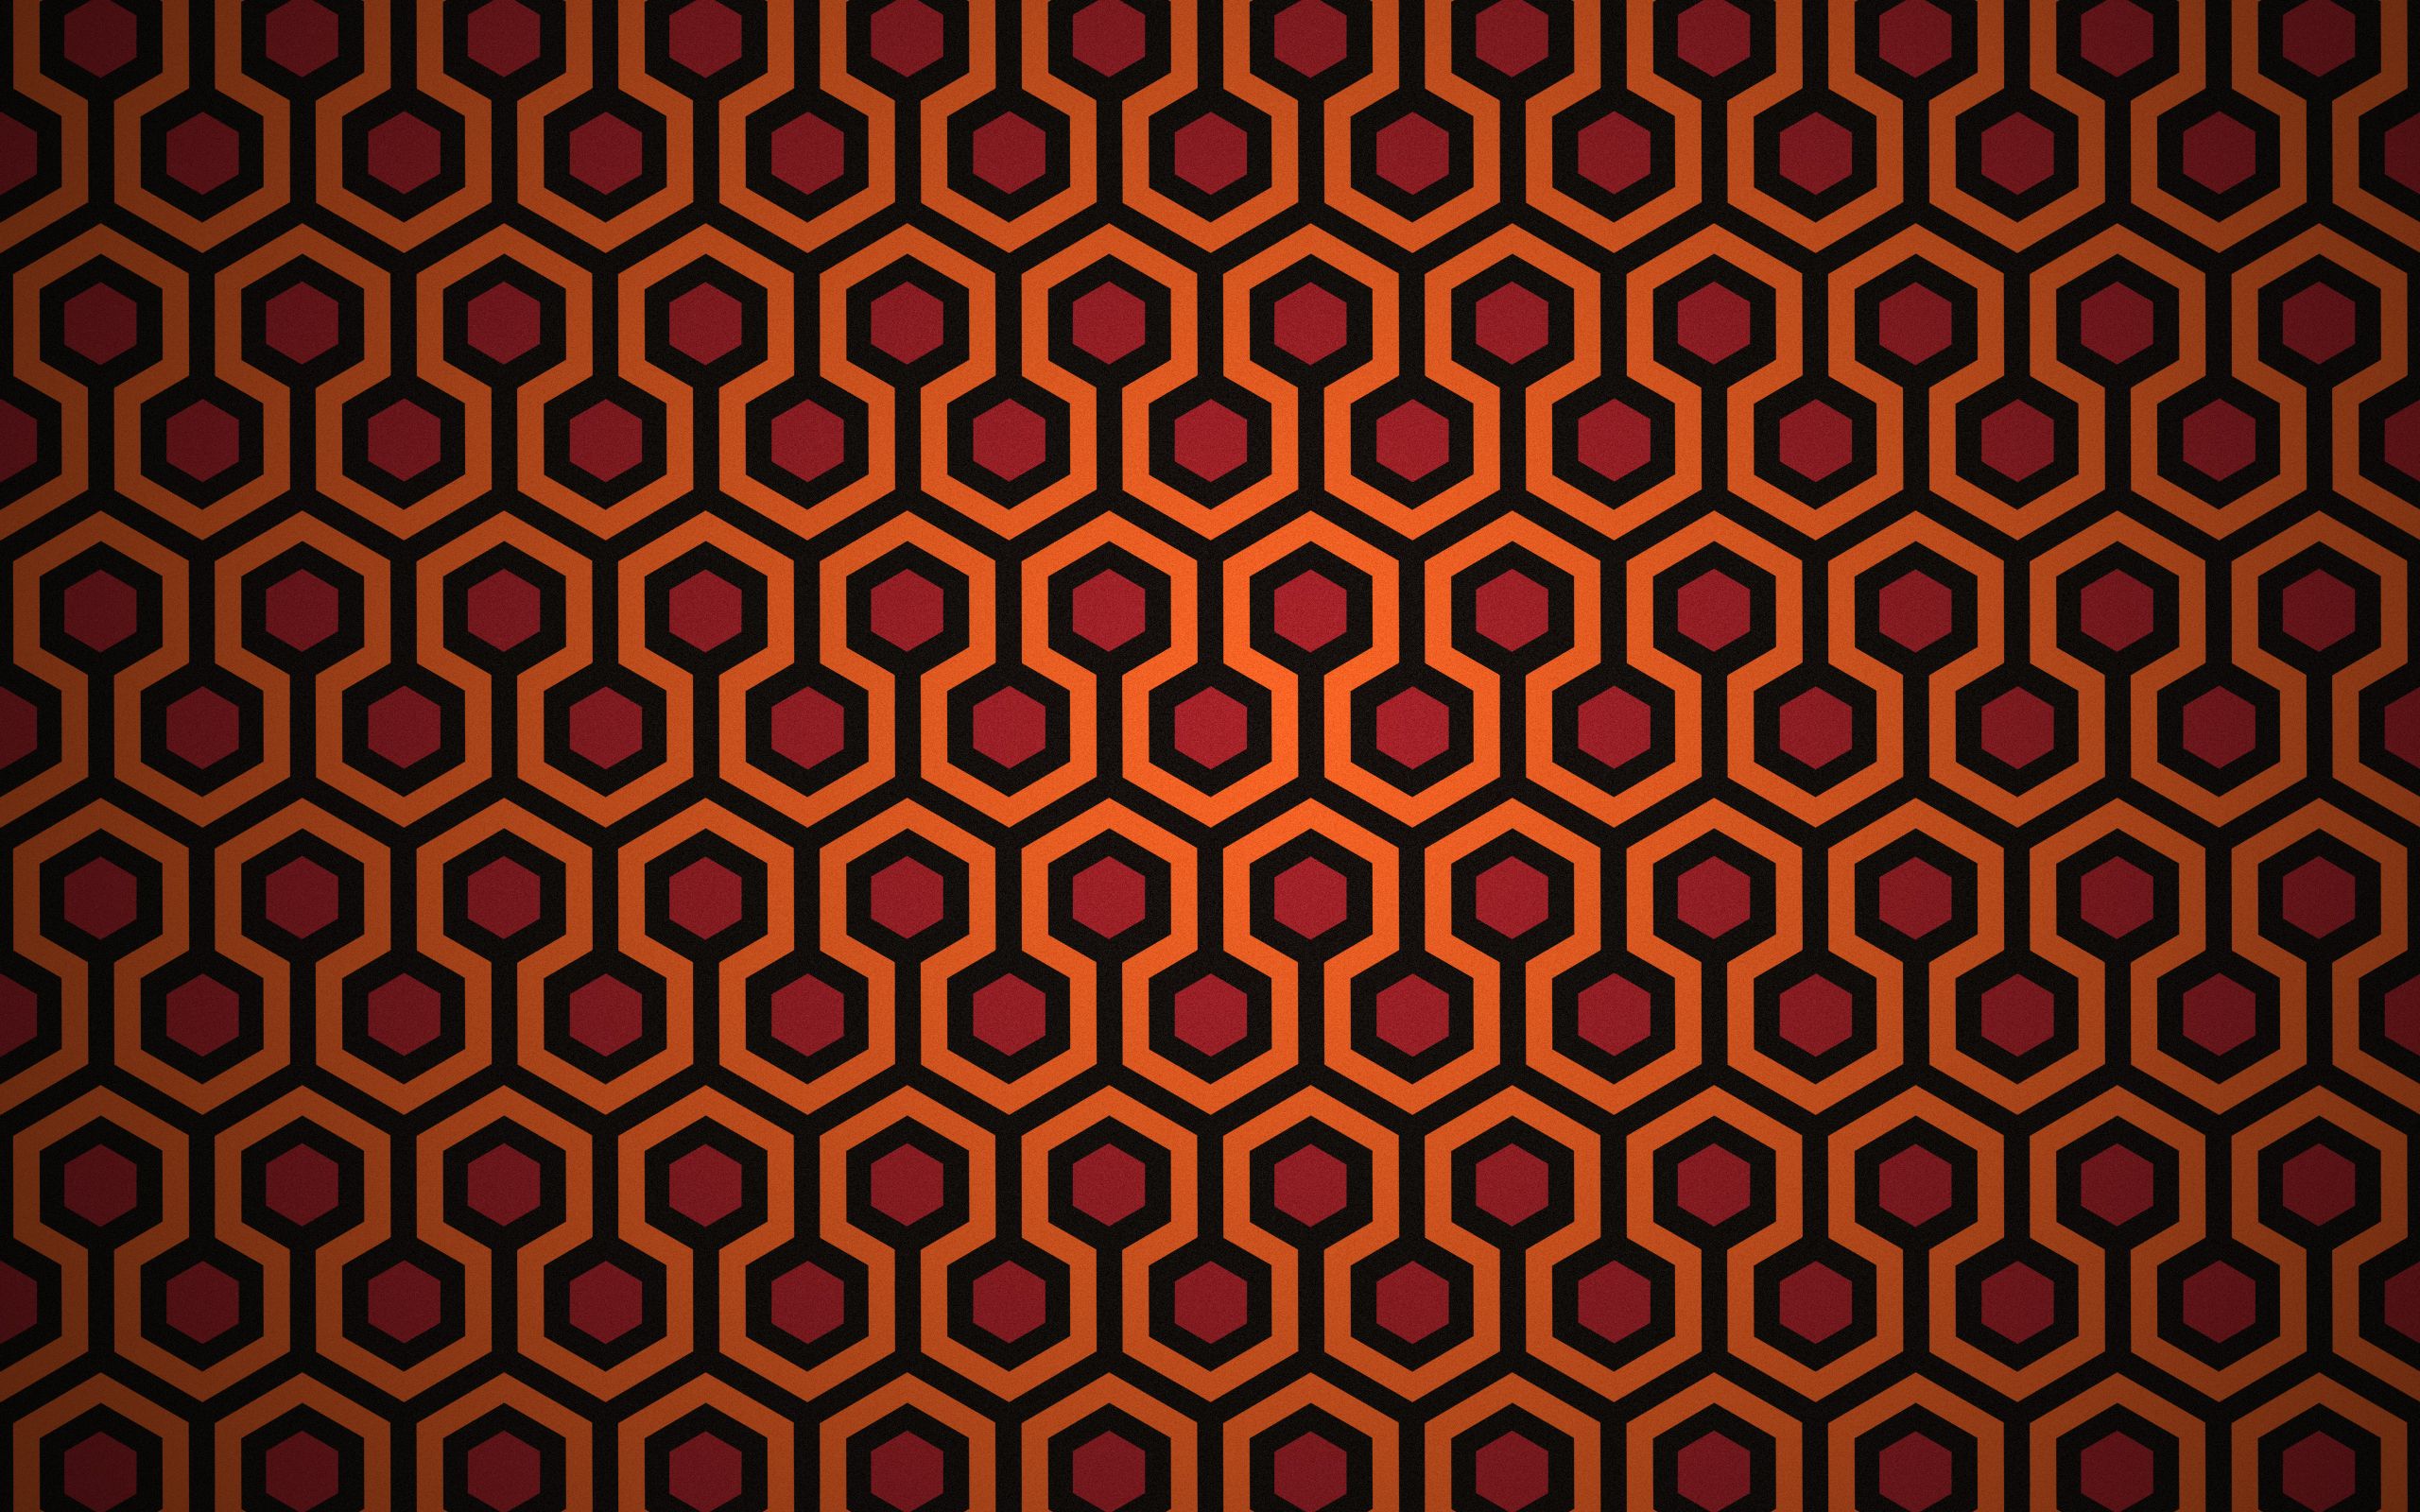 The Shining Background In HD Wallpaper Pattern Graphic